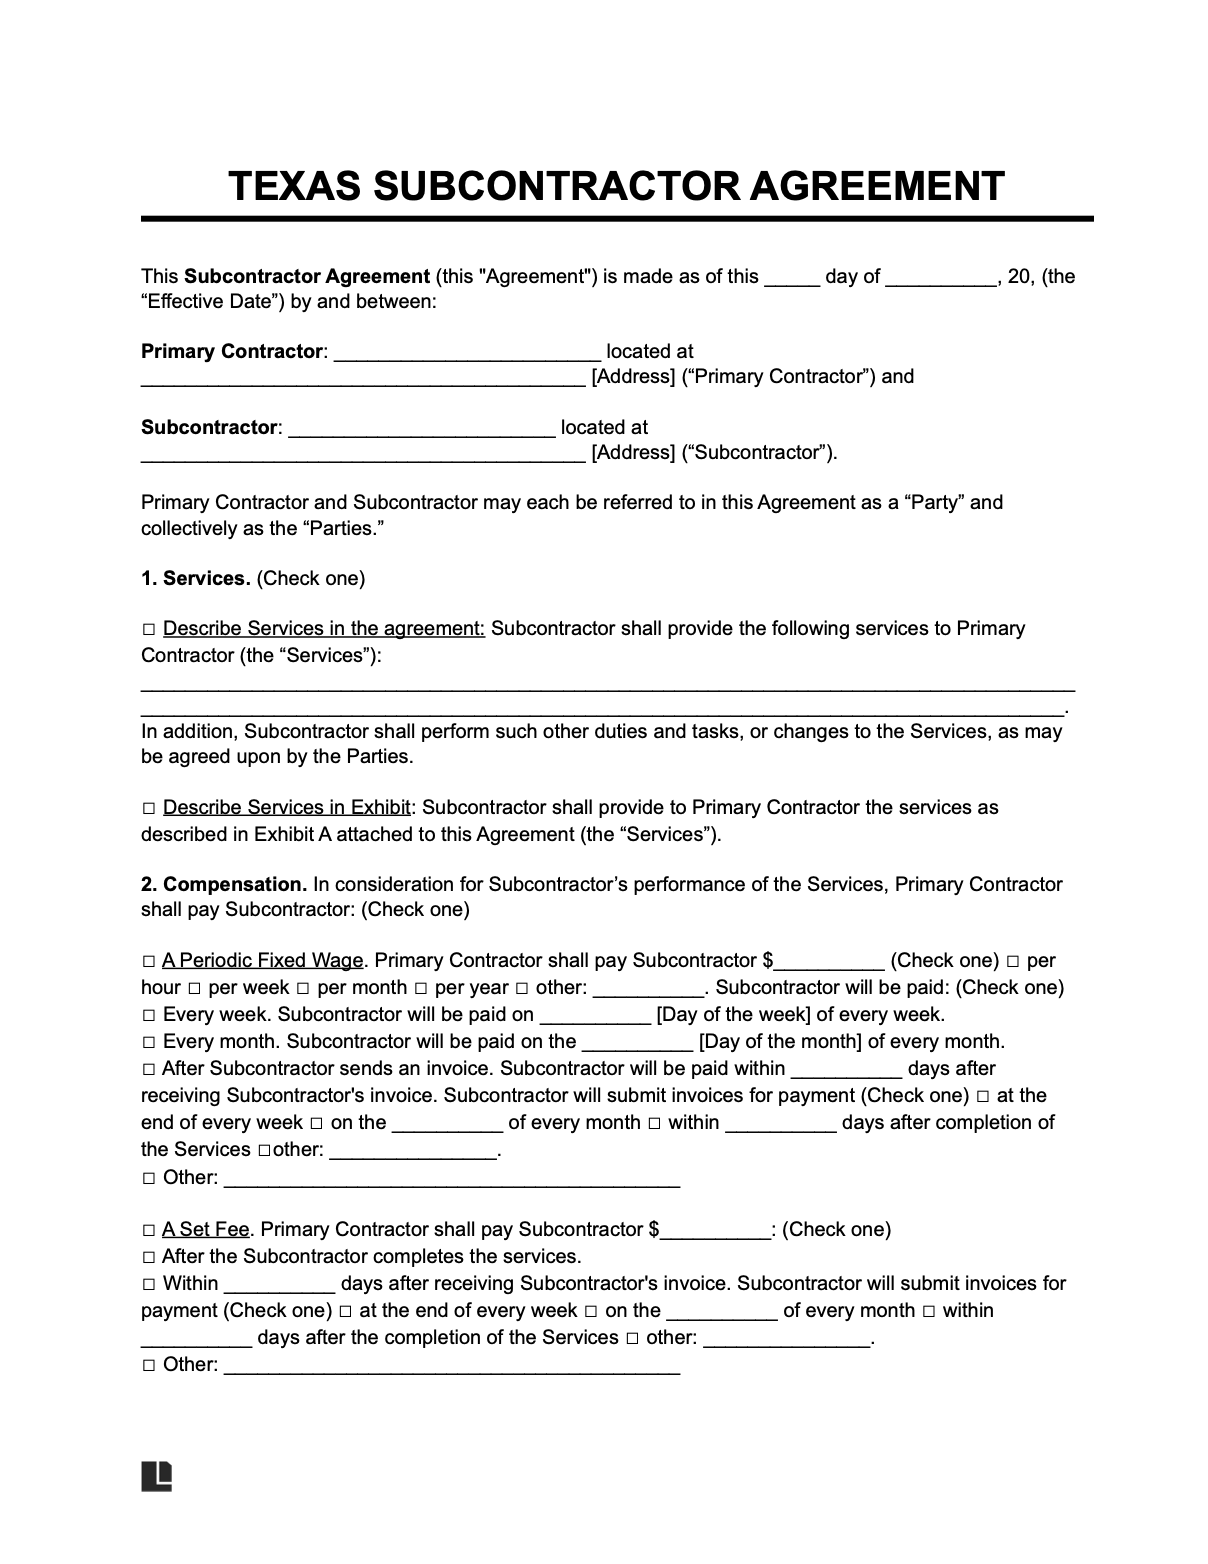 texas subcontractor agreement template